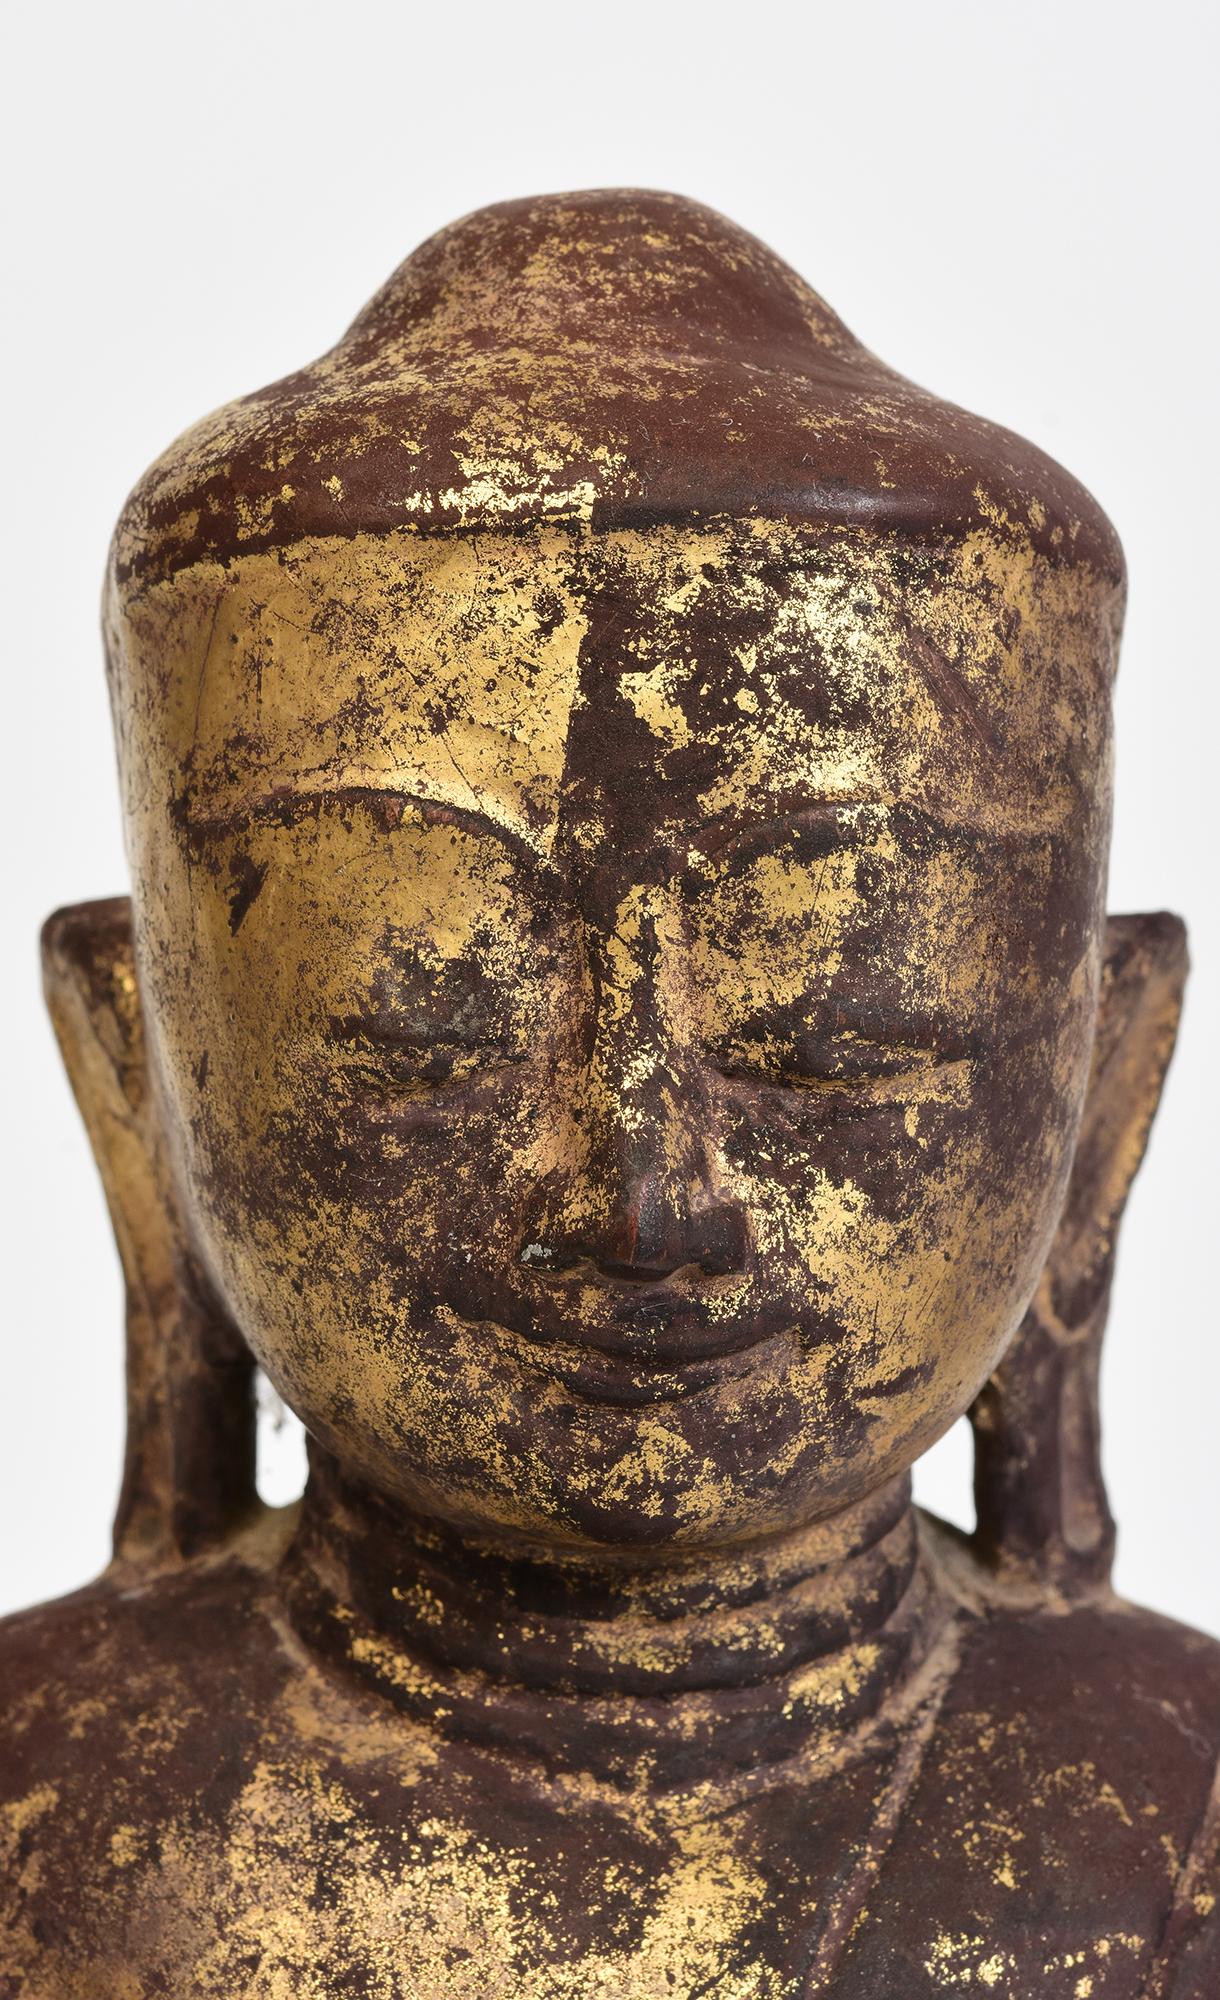 Antique Burmese wooden lotus Buddha sitting in Mara Vijaya (calling the earth to witness) posture on a base.

Age: Burma, Shan Period, 17th Century
Size: Height 33 C.M. / Width 19 C.M.
Condition: Nice condition overall (some expected degradation due